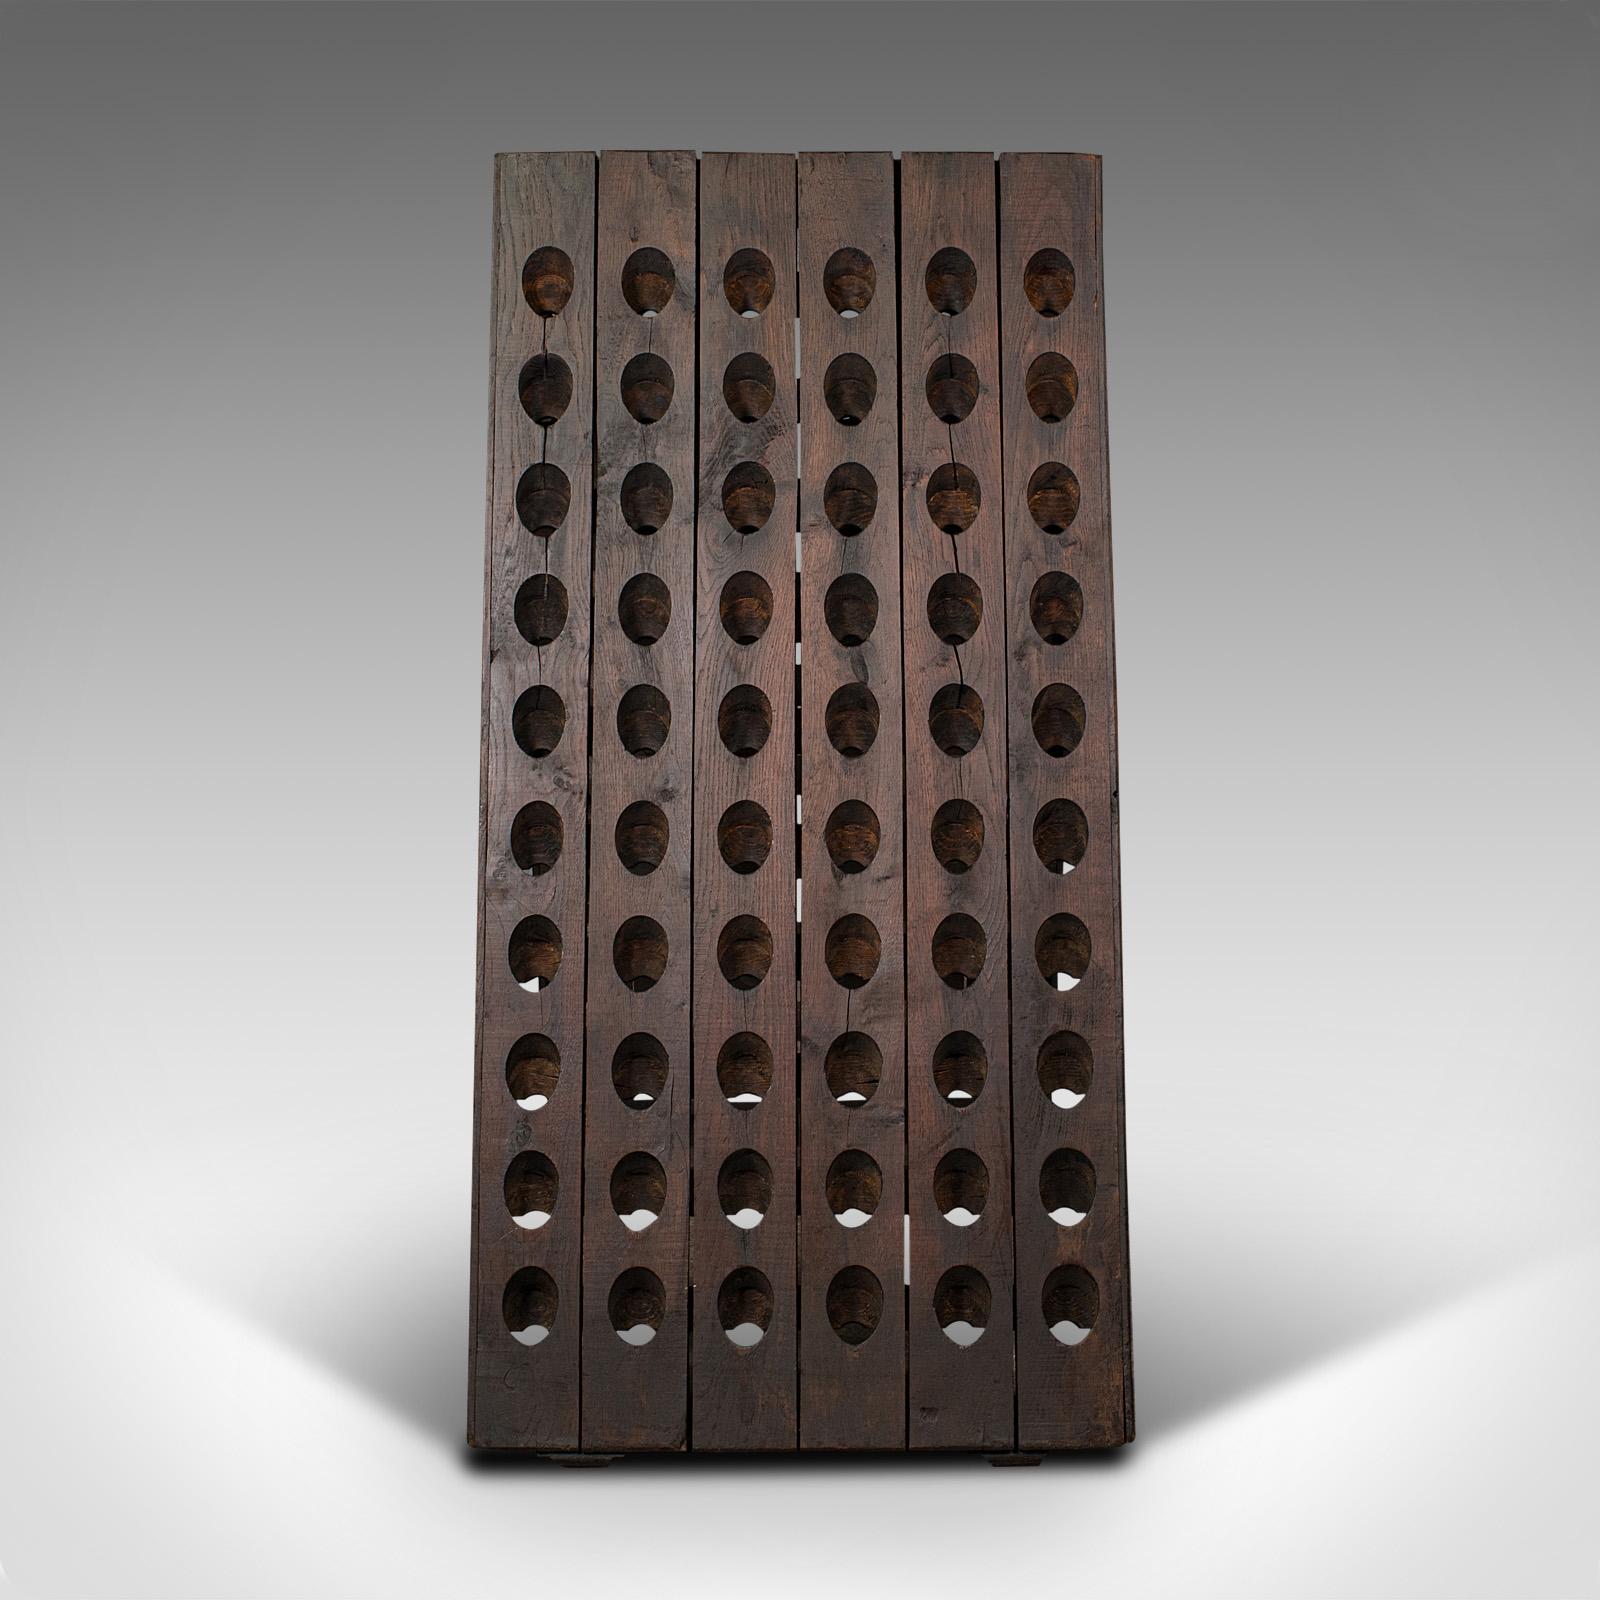 This is an antique chateau champagne riddler. A French, oak 120-bottle wine rack, dating to the early Victorian period, circa 1850.

Generously sized riddler with French country house appeal.
Displays a desirable aged patina and in good original